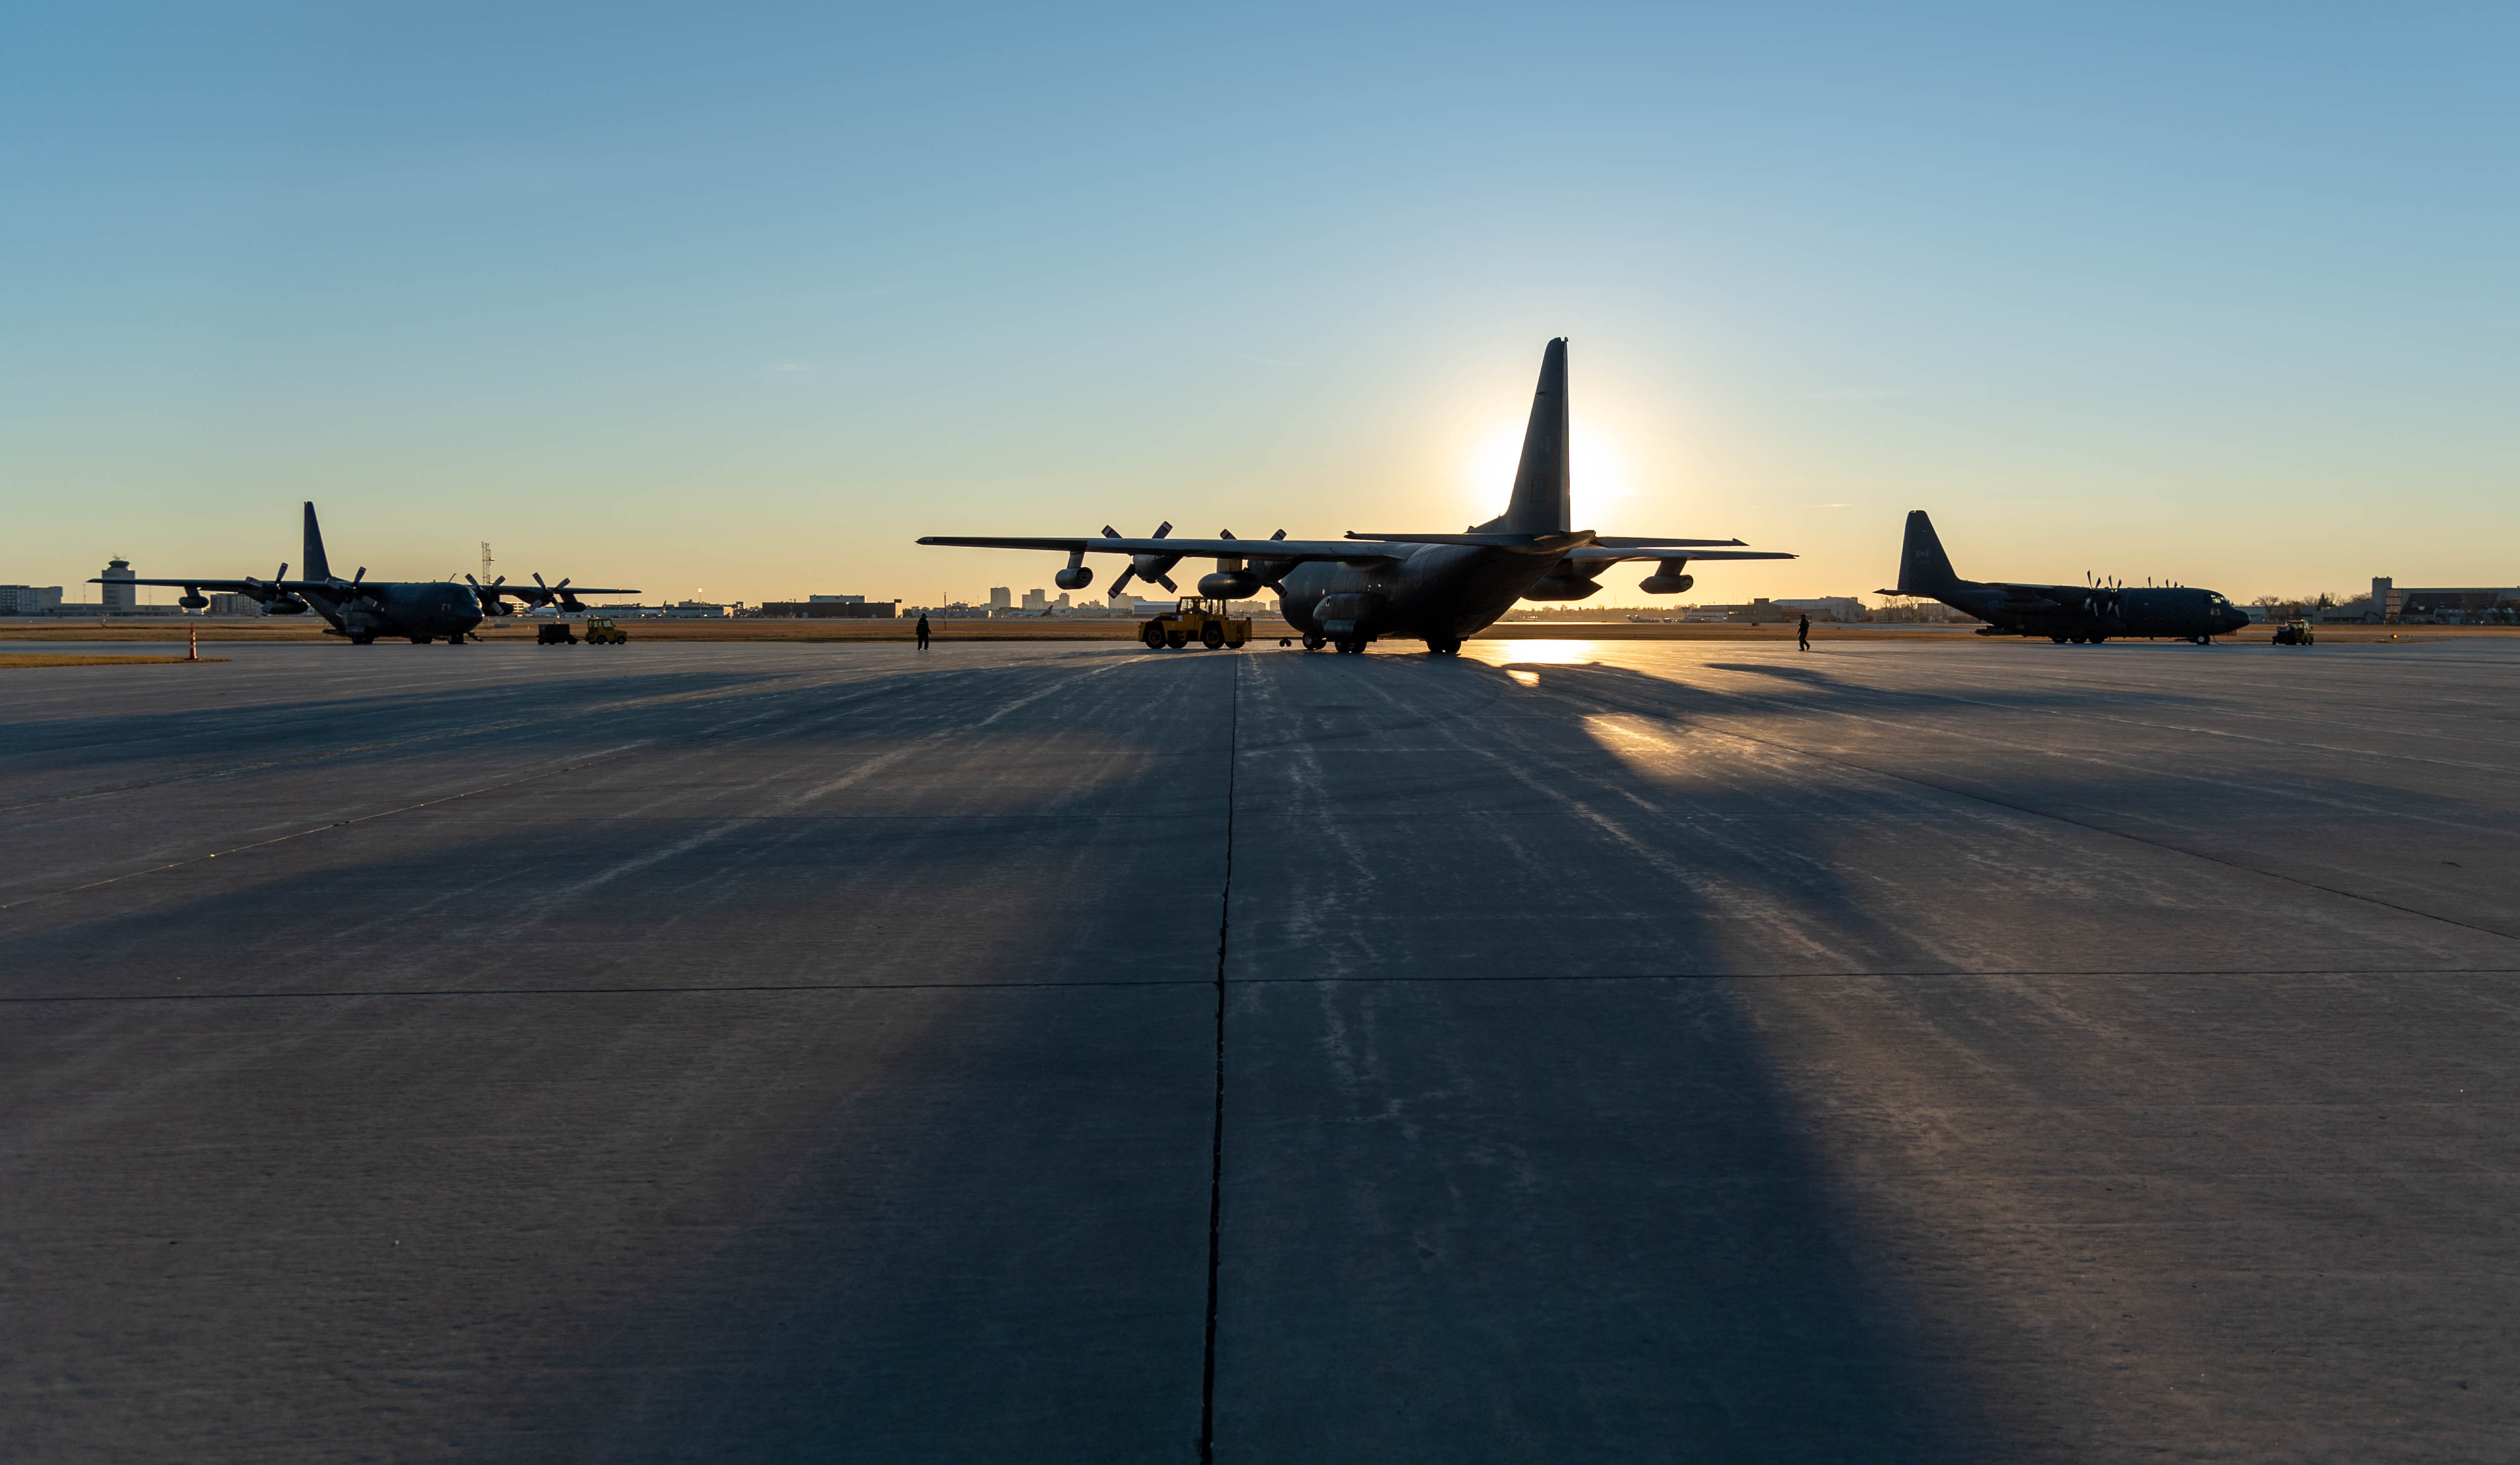 CC-130 Hercules aircraft sit on the tarmac at 17 Wing Winnipeg, Manitoba, at dawn on October 13, 2020, before taking off to fly over Winnipeg to mark the 60th year of service of the aircraft in the Royal Canadian Air Force. PHOTO: Corporal Darryl Hepner